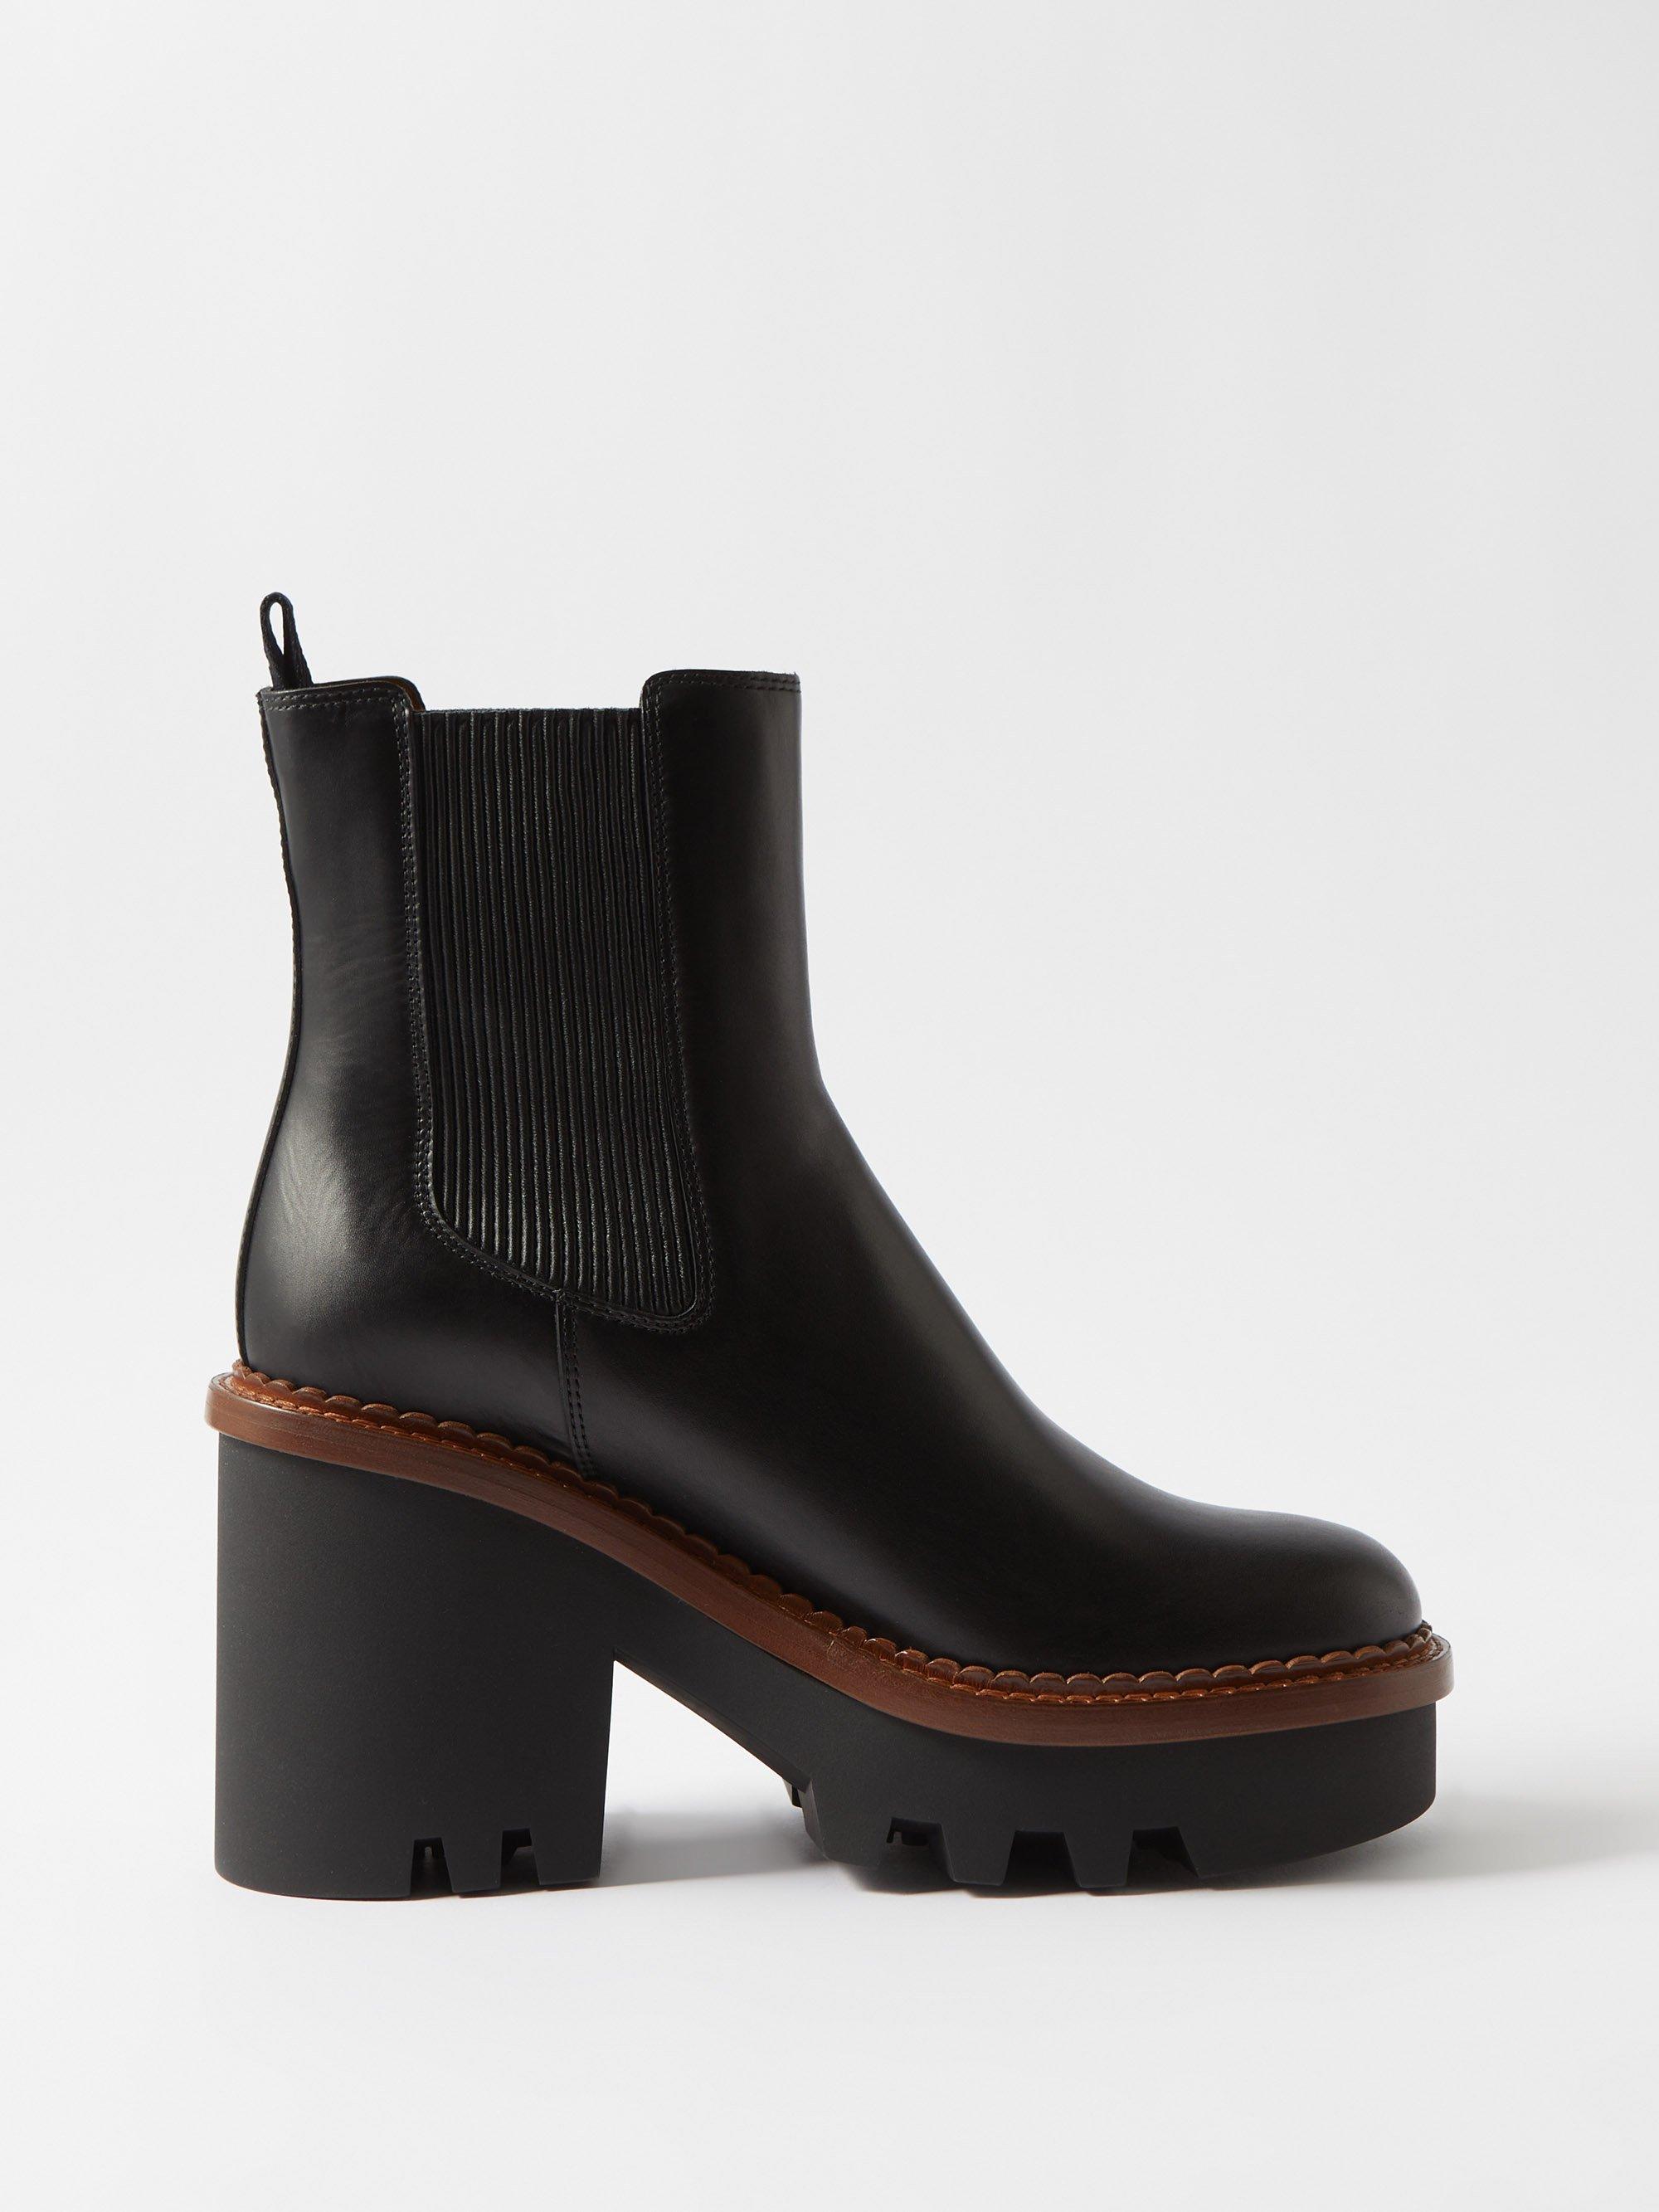 Chloé Owena Leather Chelsea Boots in Black | Lyst Canada